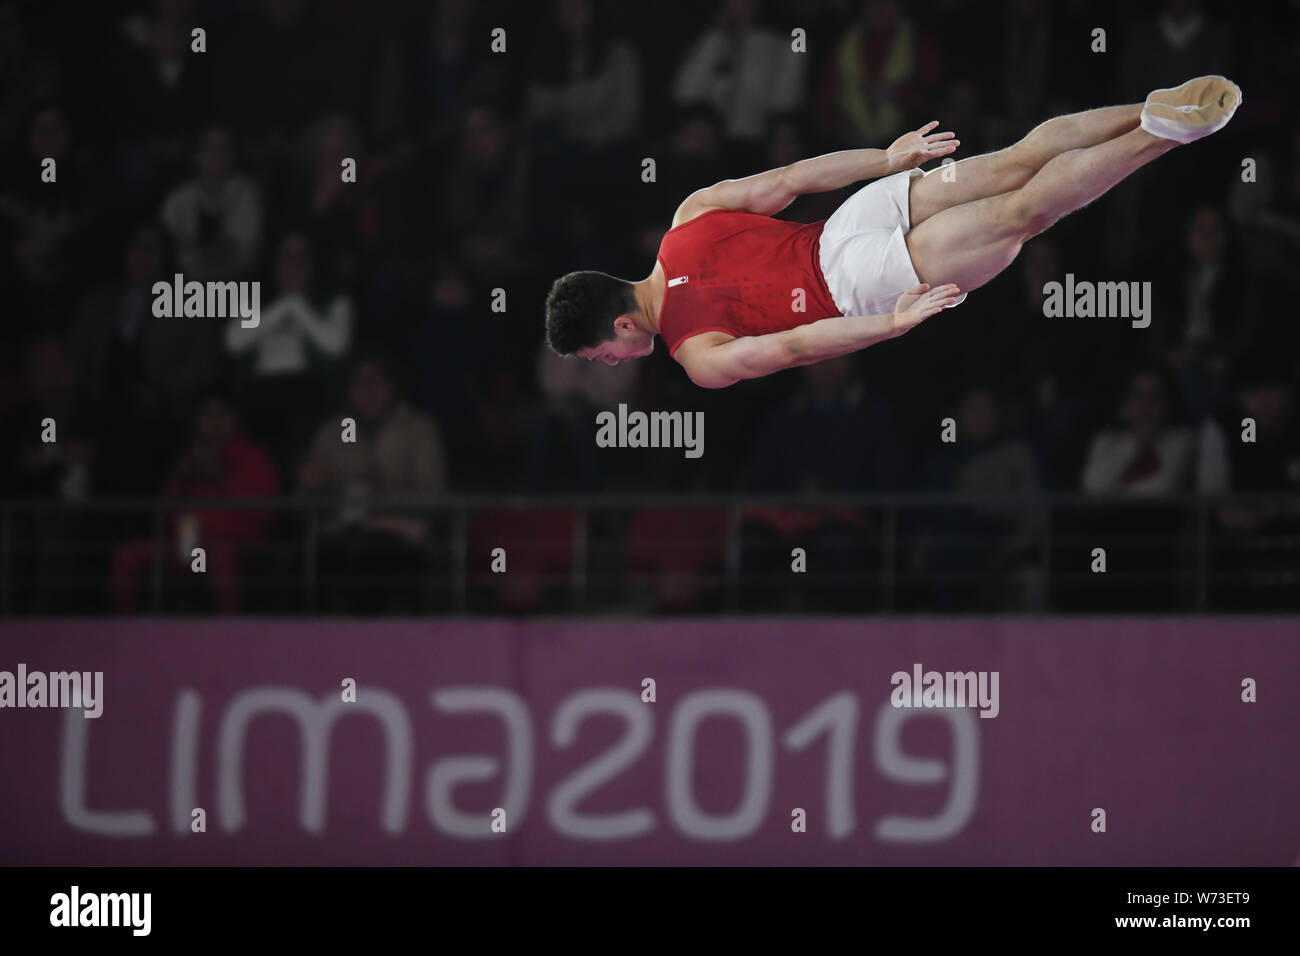 Lima, Peru. 4th Aug, 2019. JEREMY CHARTIER from Canada flips upside down during the competition held in the Polideportivo Villa El Salvador in Lima, Peru. Credit: Amy Sanderson/ZUMA Wire/Alamy Live News Stock Photo